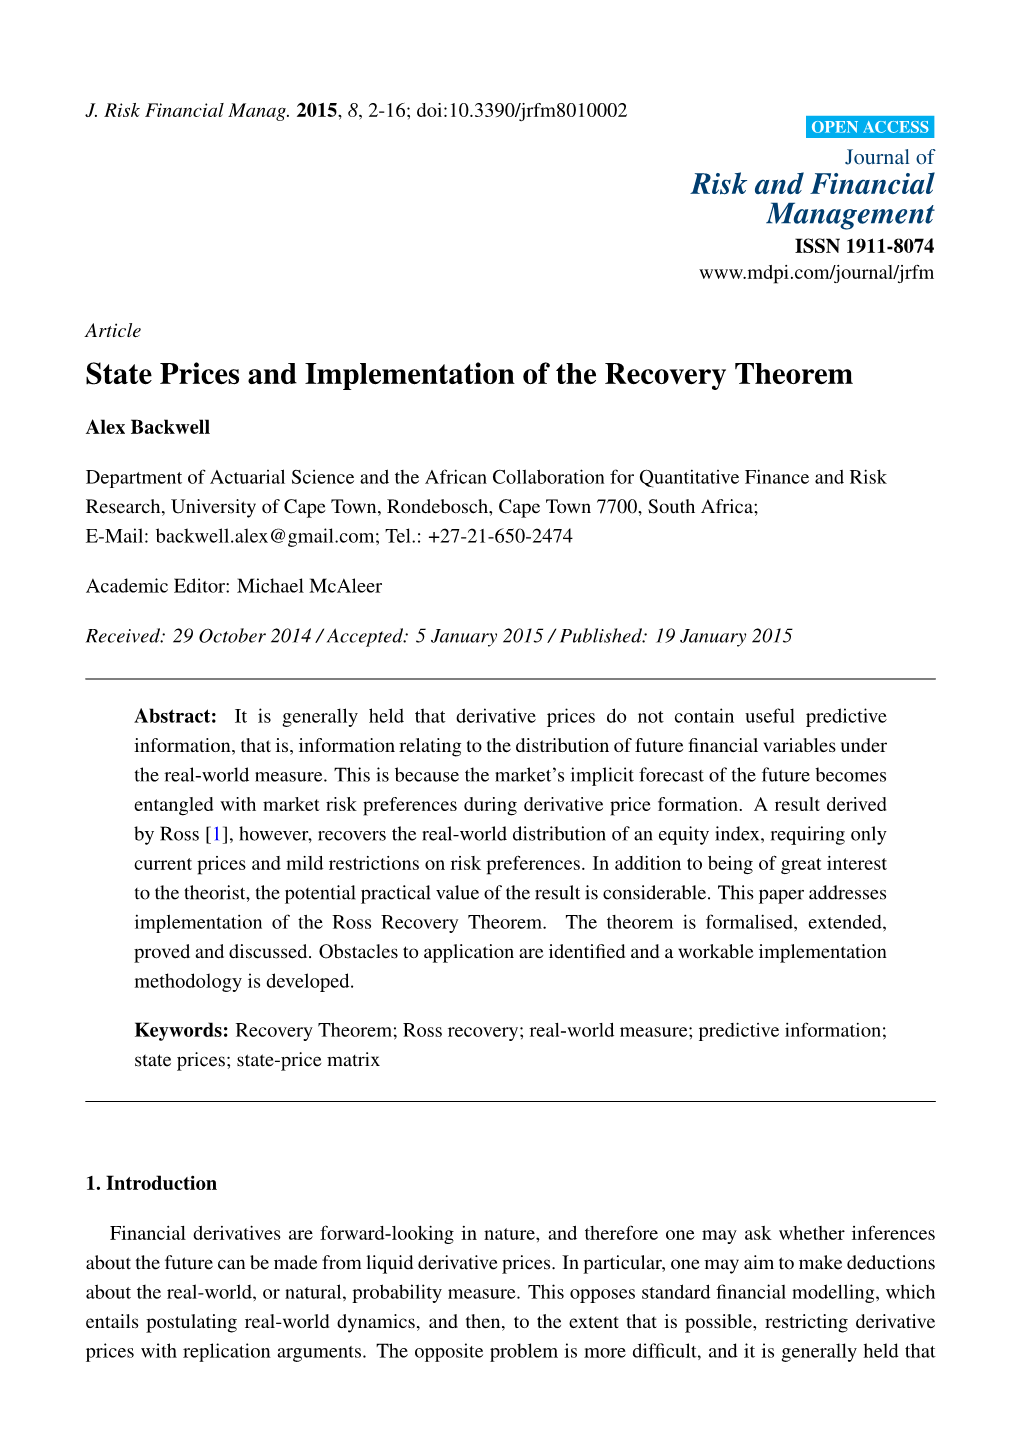 State Prices and Implementation of the Recovery Theorem